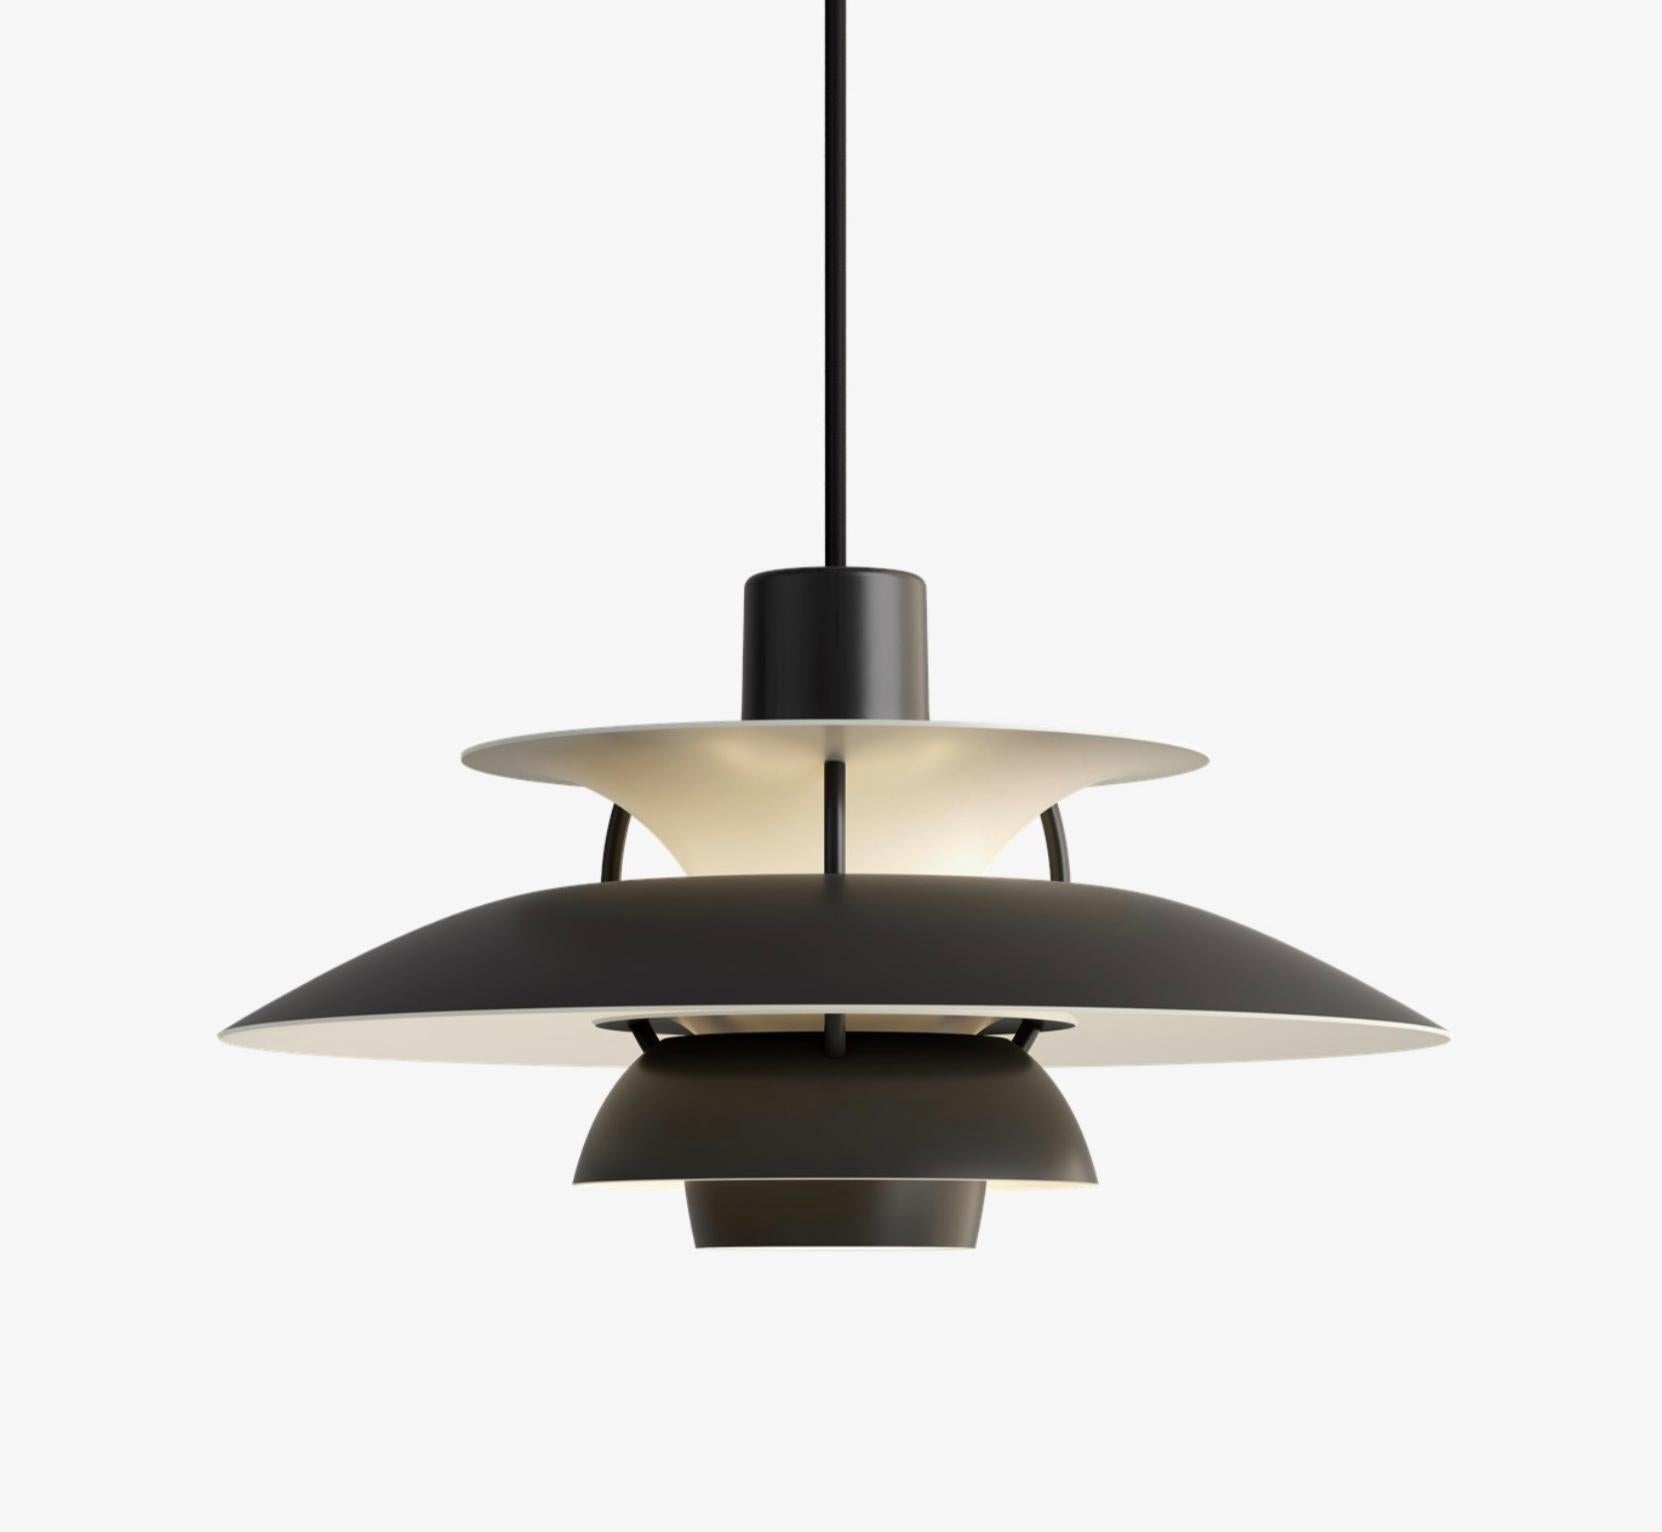 Poul Henningsen PH5 mini pendant for Louis Poulsen. Designed 1958, Mini in 2017. New, current production.

Poul Henningsen developed the PH 5 in 1958 in response to constant changes made to the shape and size of incandescent bulbs by bulb